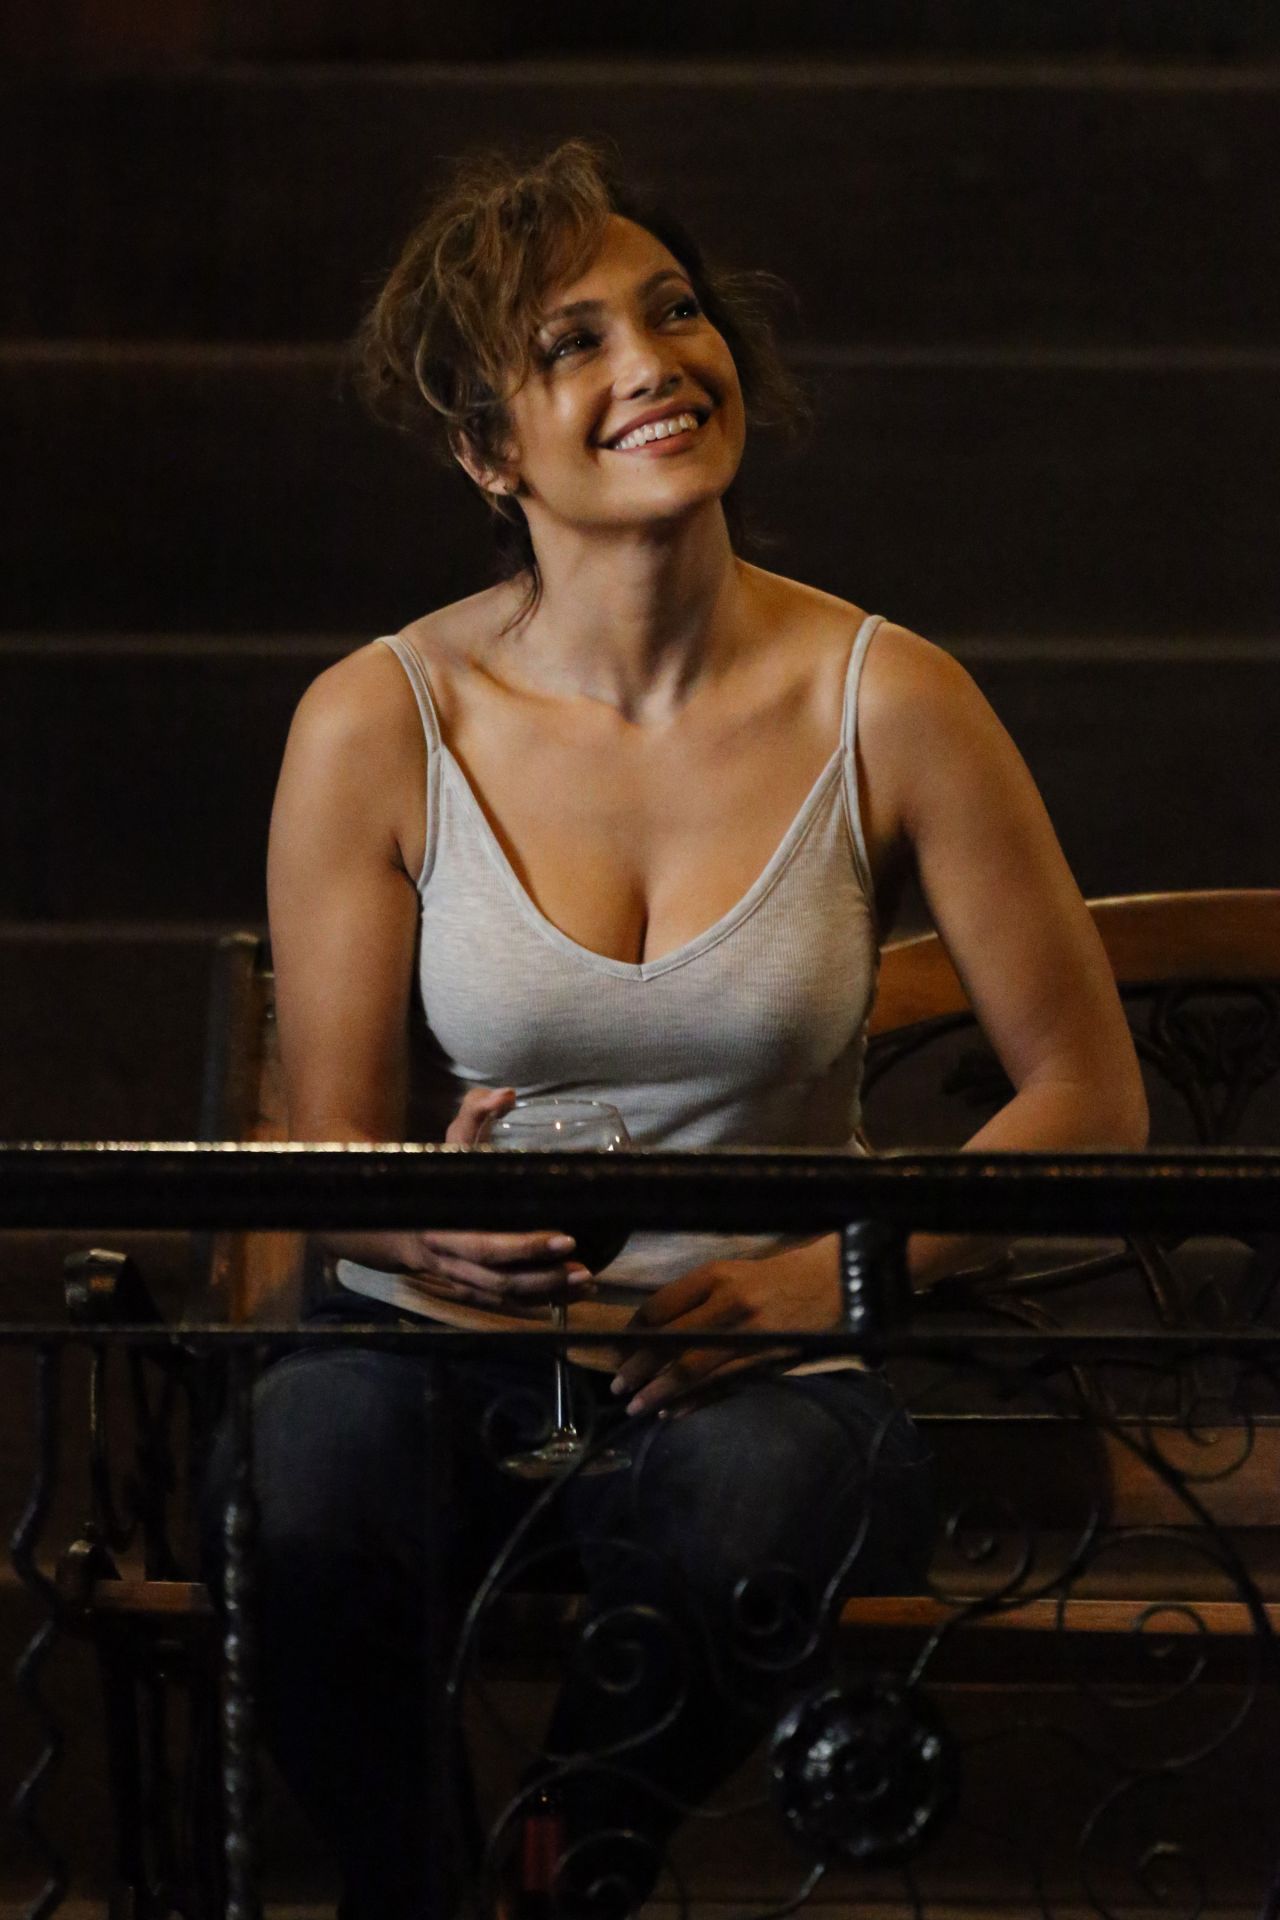 Jennifer Lopez on the Set of 'Shades of Blue' in New York City, July